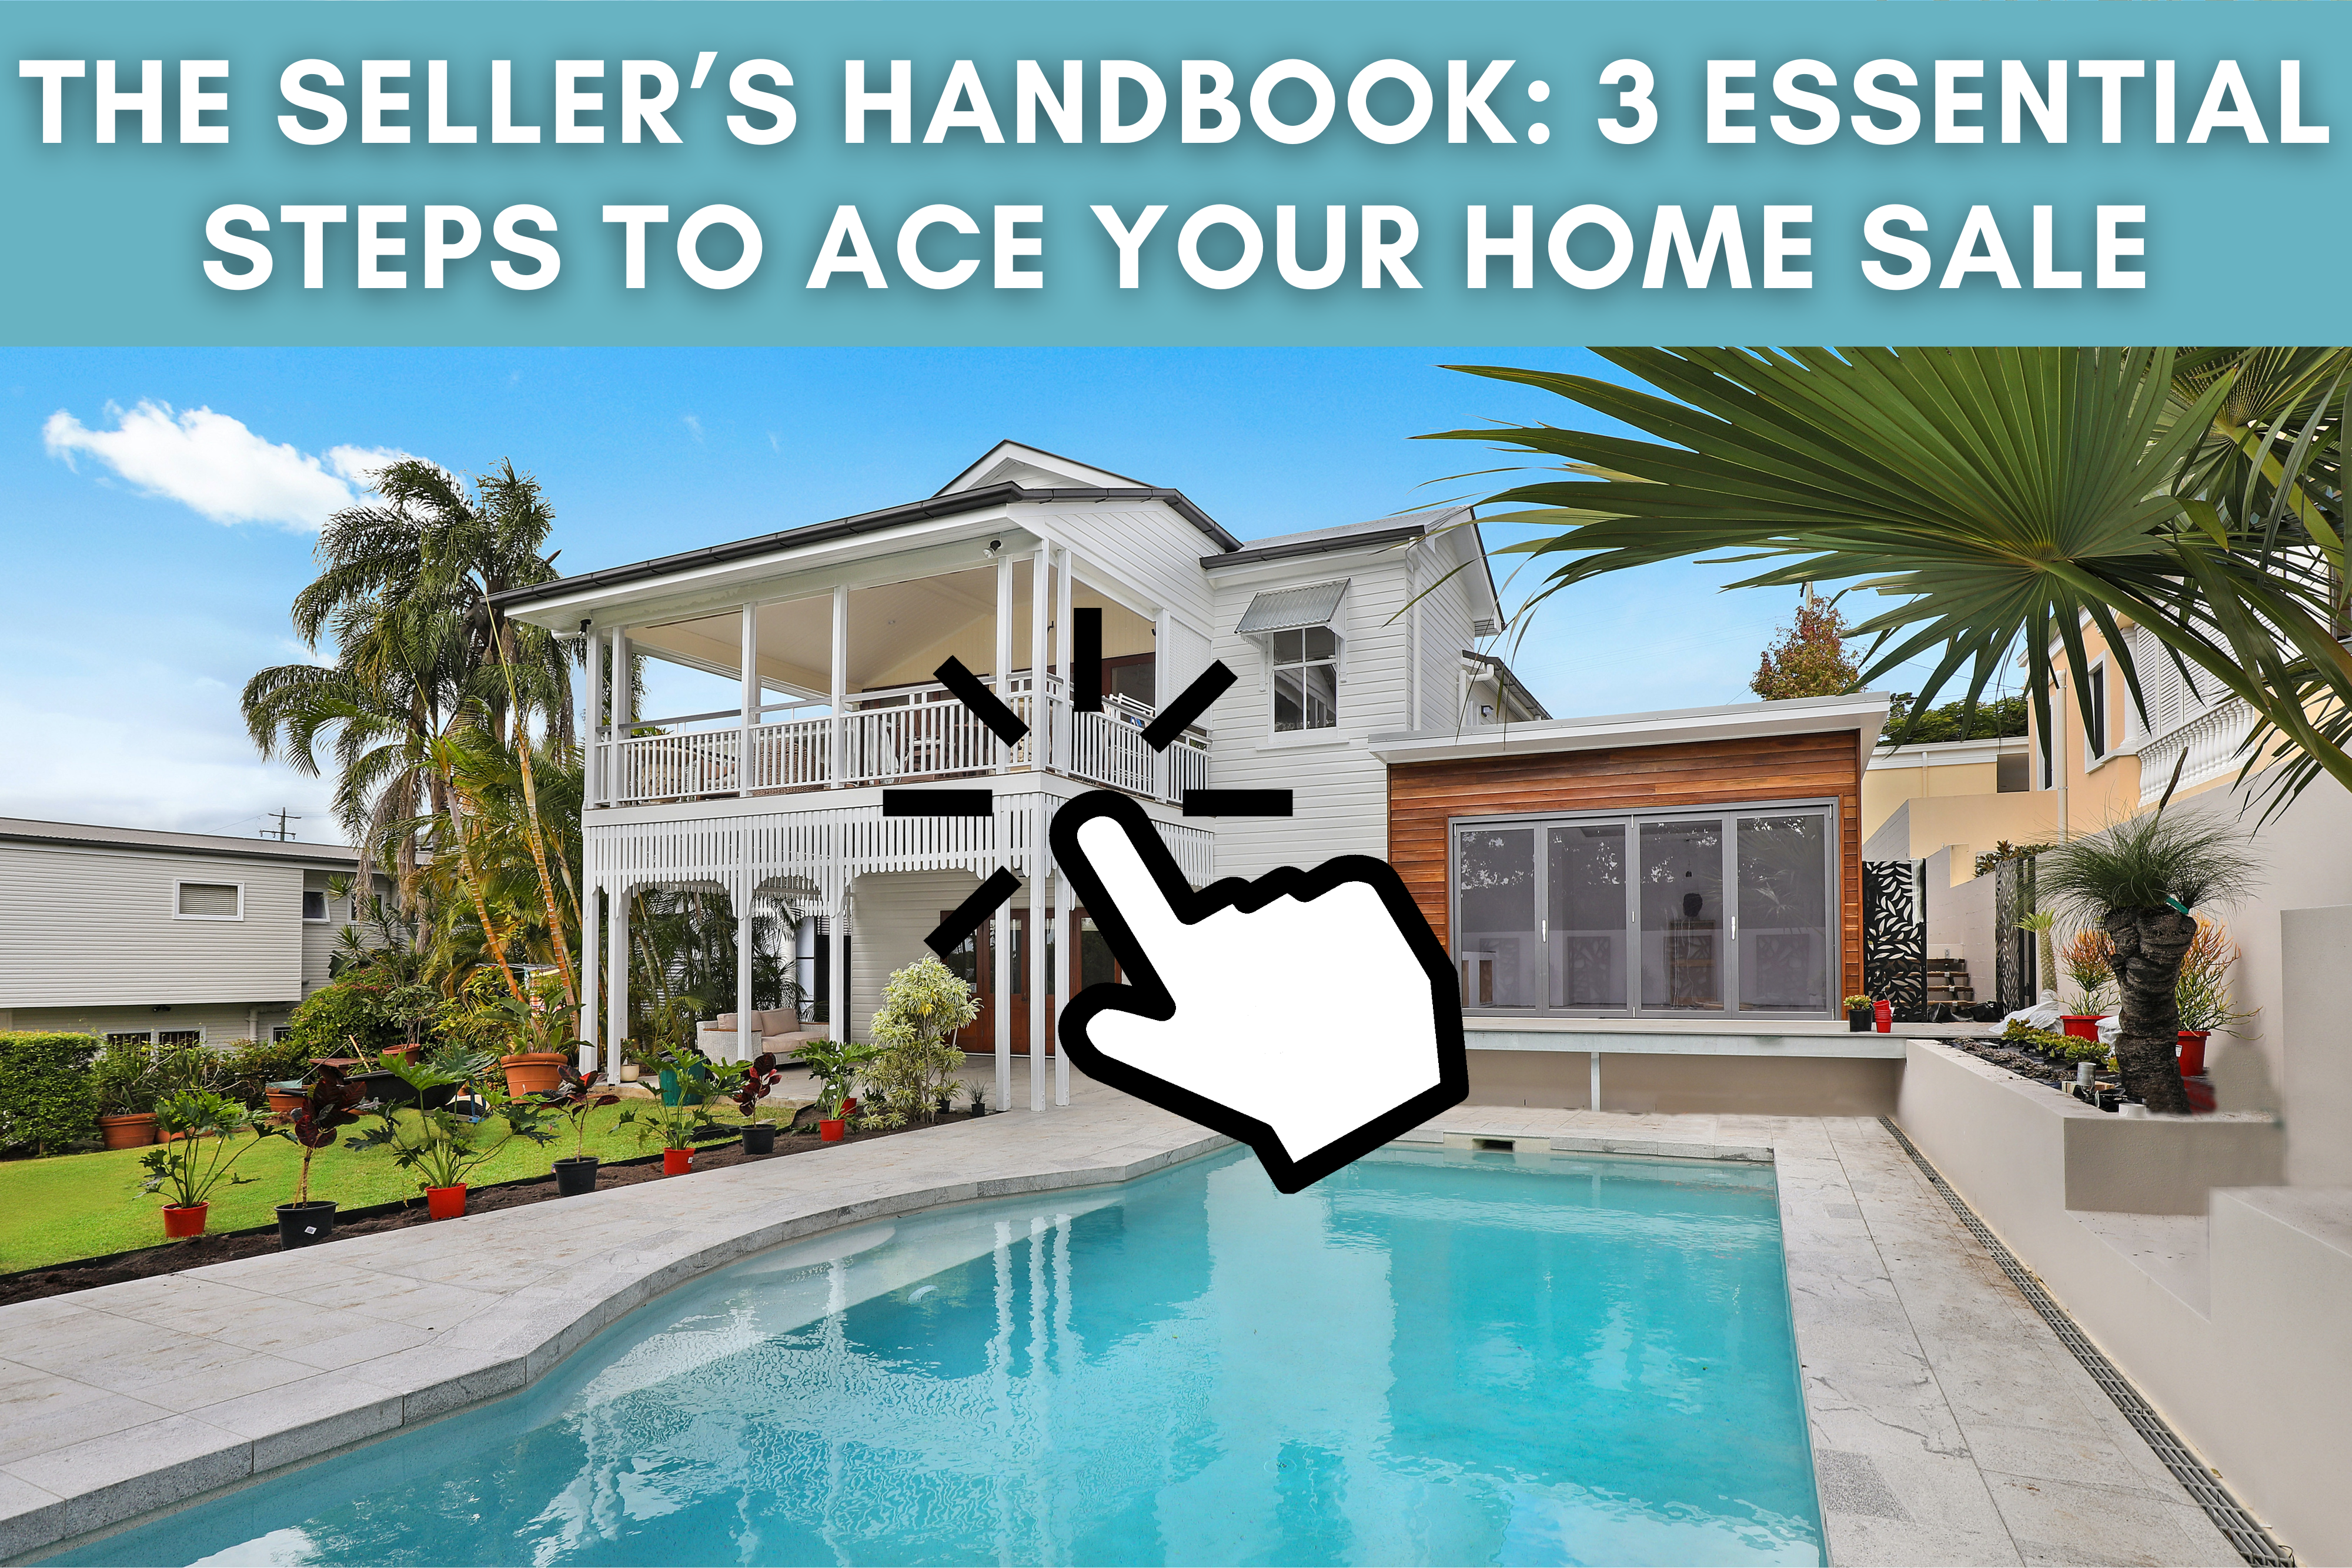 The Seller’s Handbook: 3 Essential Steps to Ace Your Home Sale